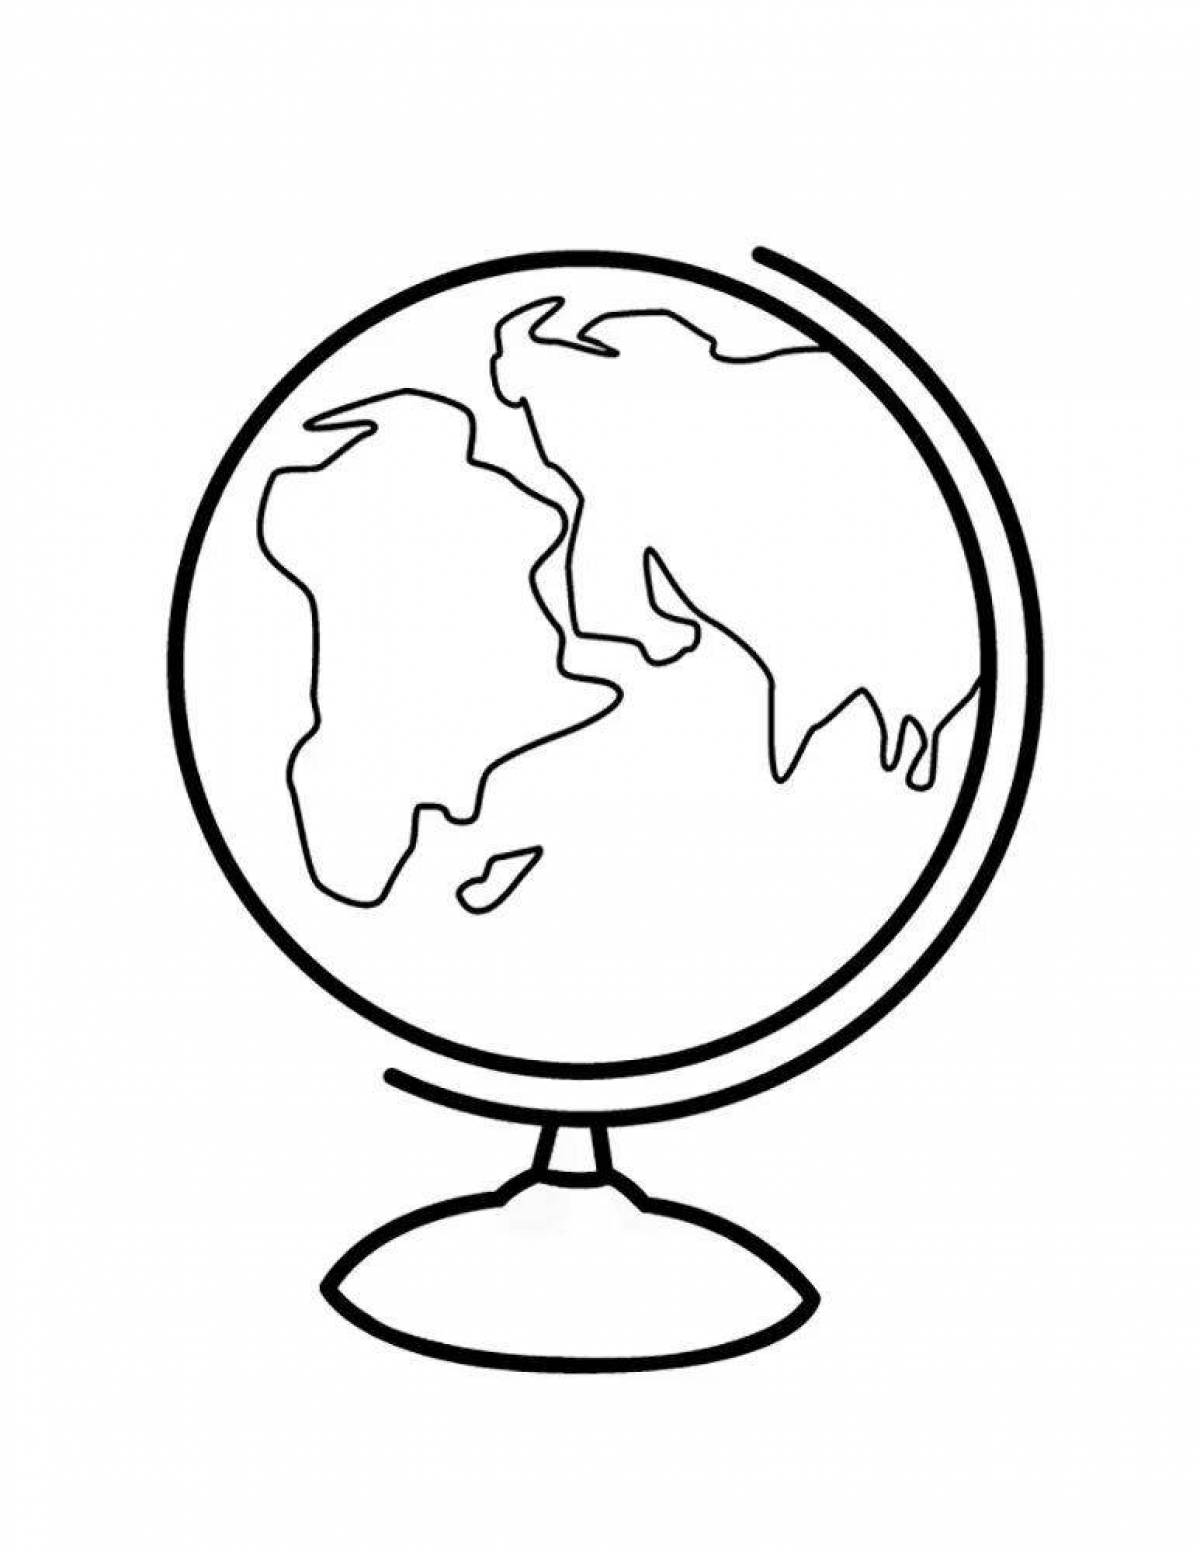 Silent globe coloring page